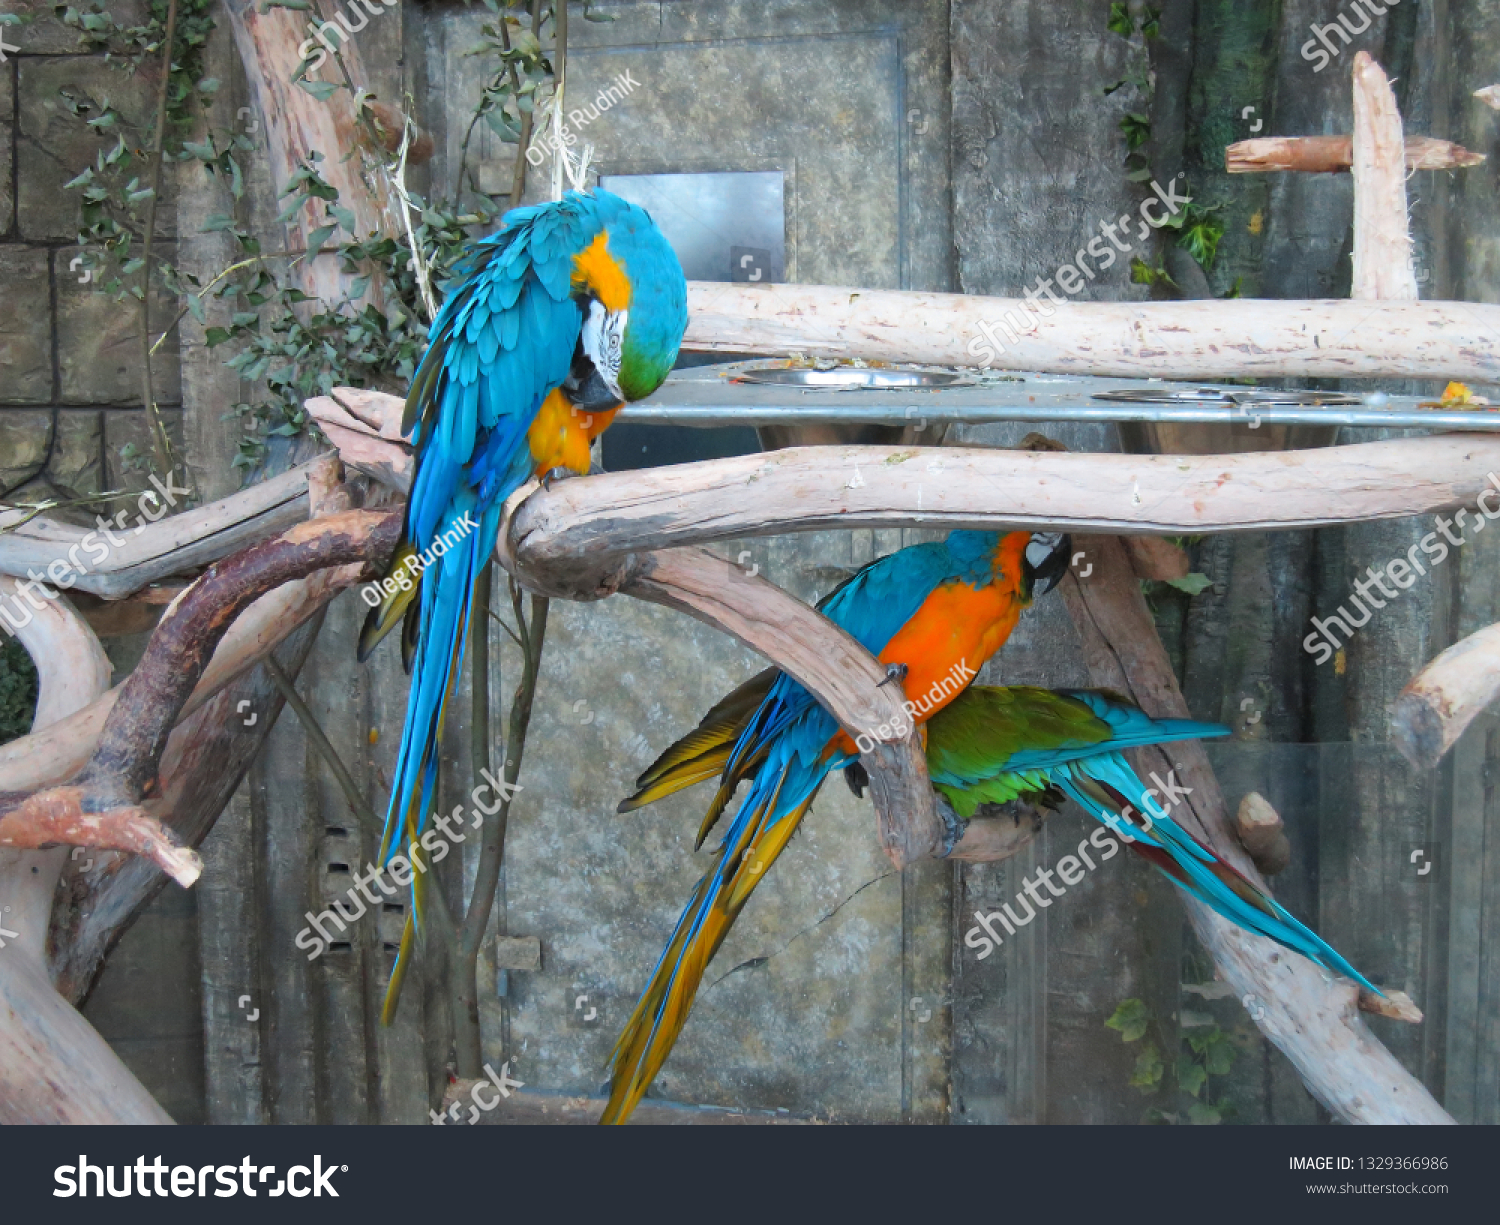 The backdrop of brightly colored macaws in the trees. Wash bright blue parrot feathers #1329366986